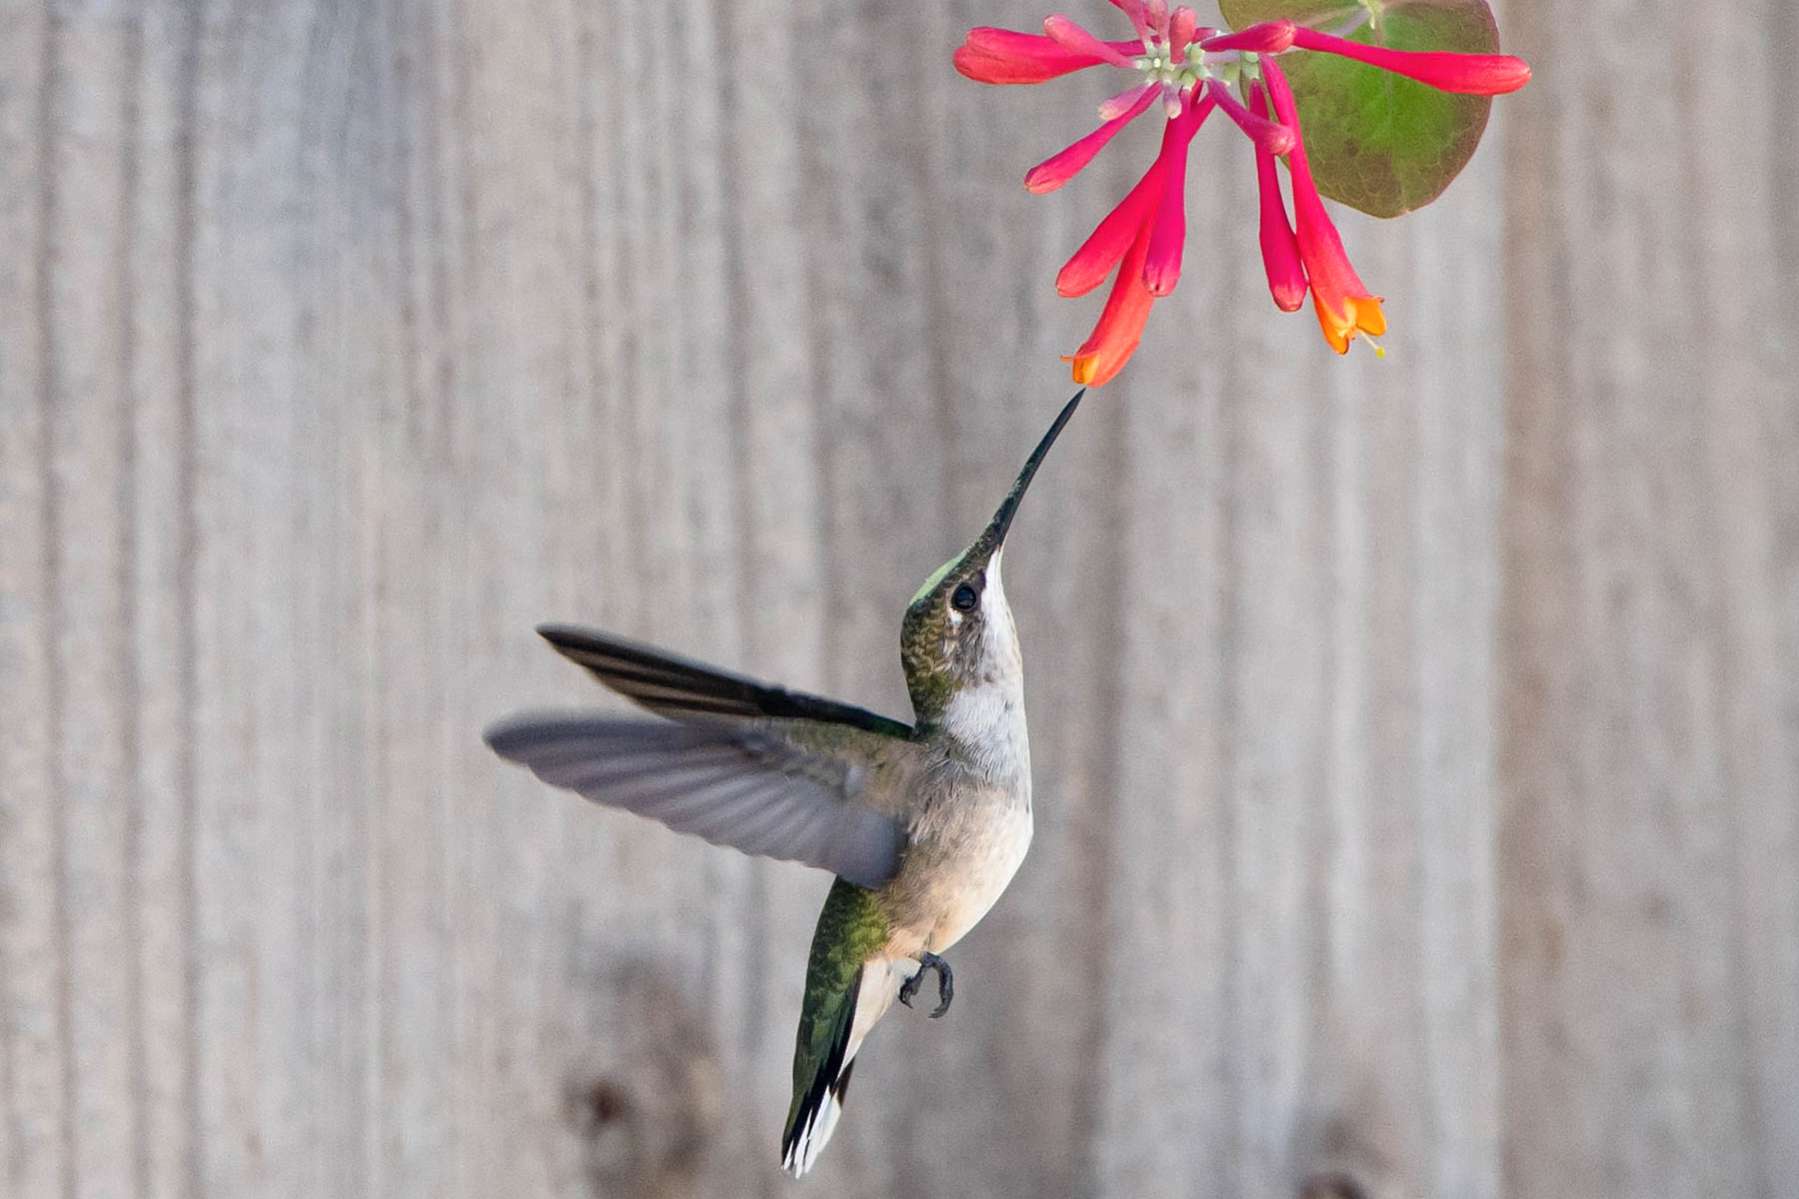 When to put out hummingbird feeders – get the timing right with these expert tips